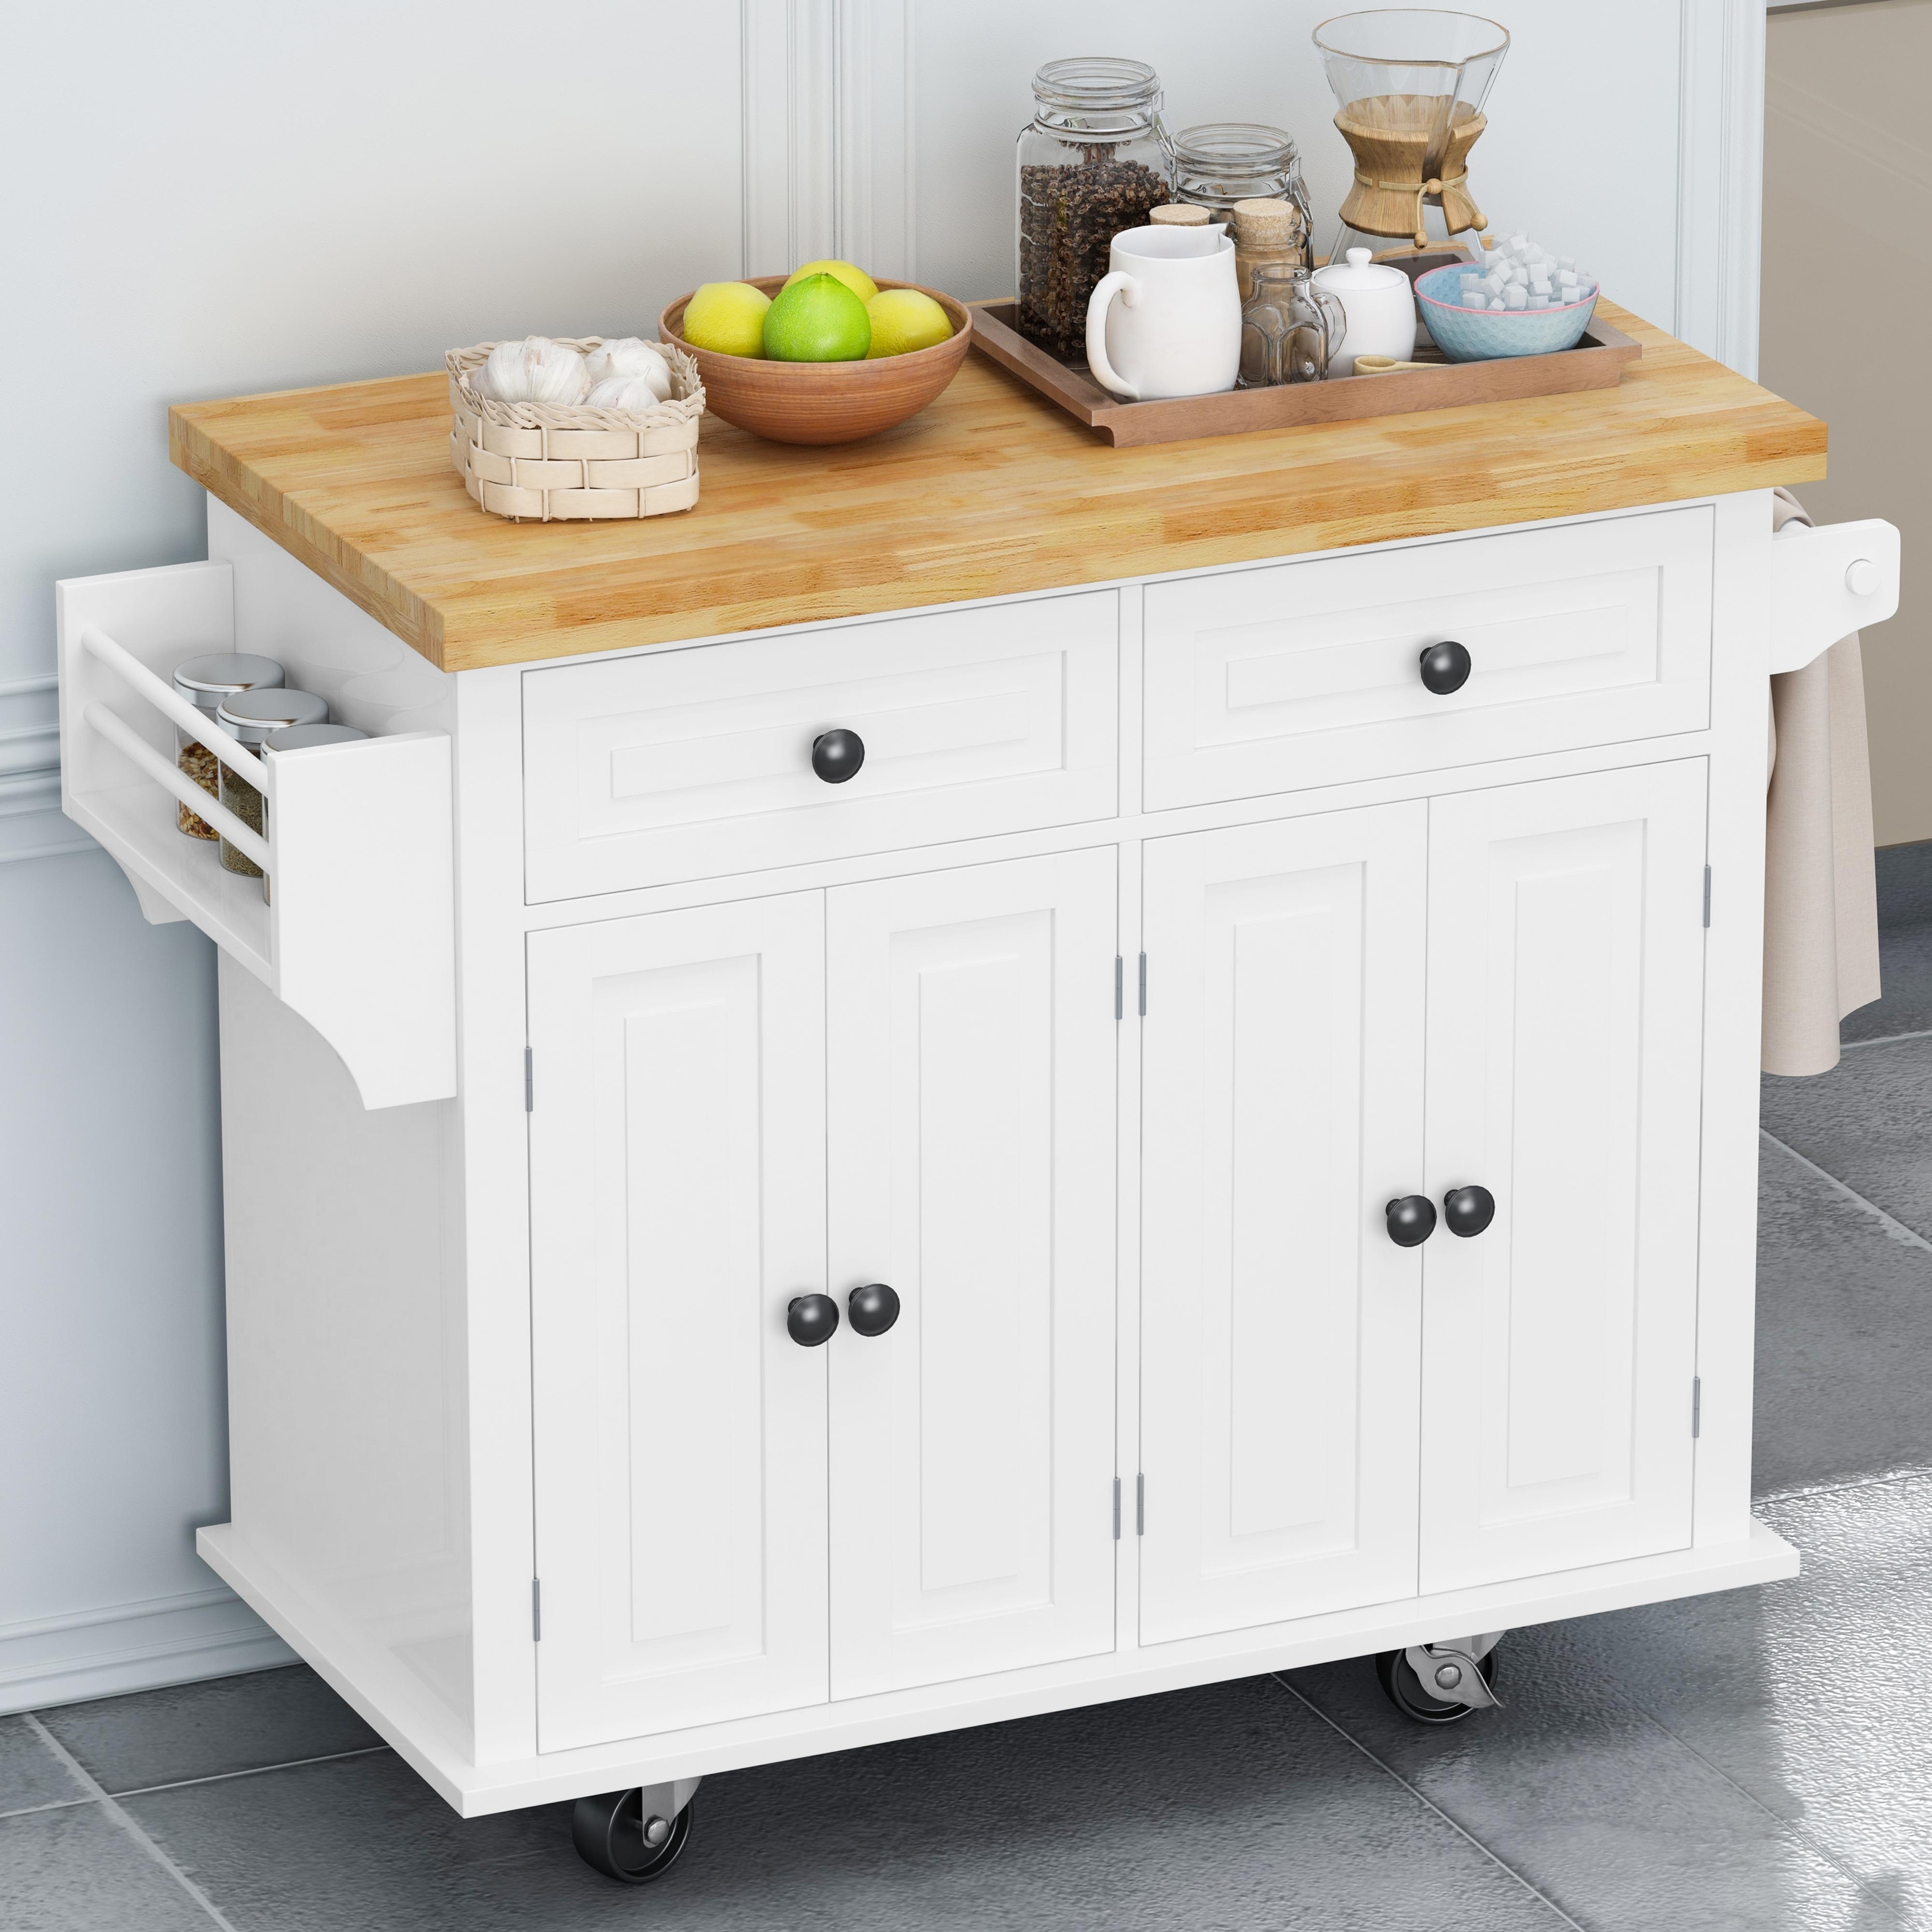 White Wood Storage Cabinet, Microwave Cart with 2 Doors 4 Casters